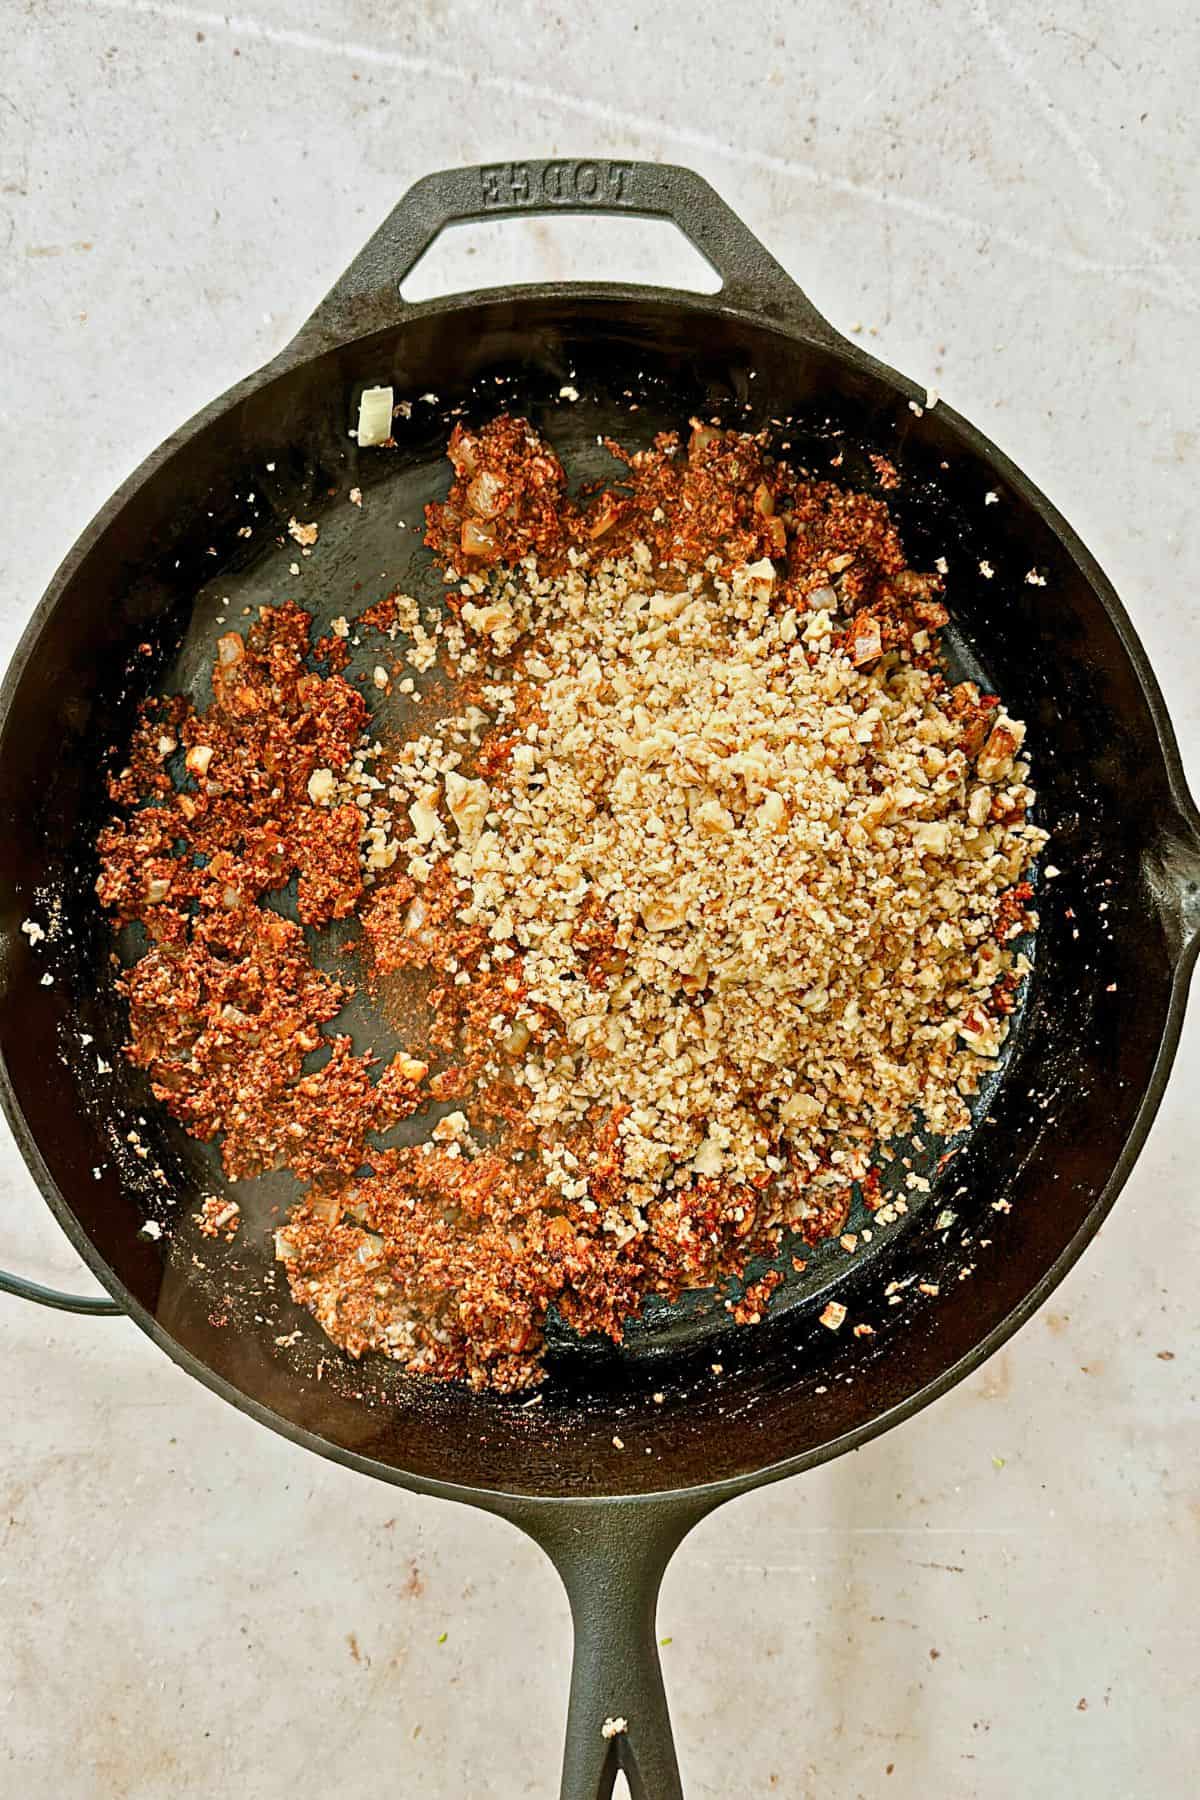 adding walnuts to mushrooms and onions in a cast iron pan; top view